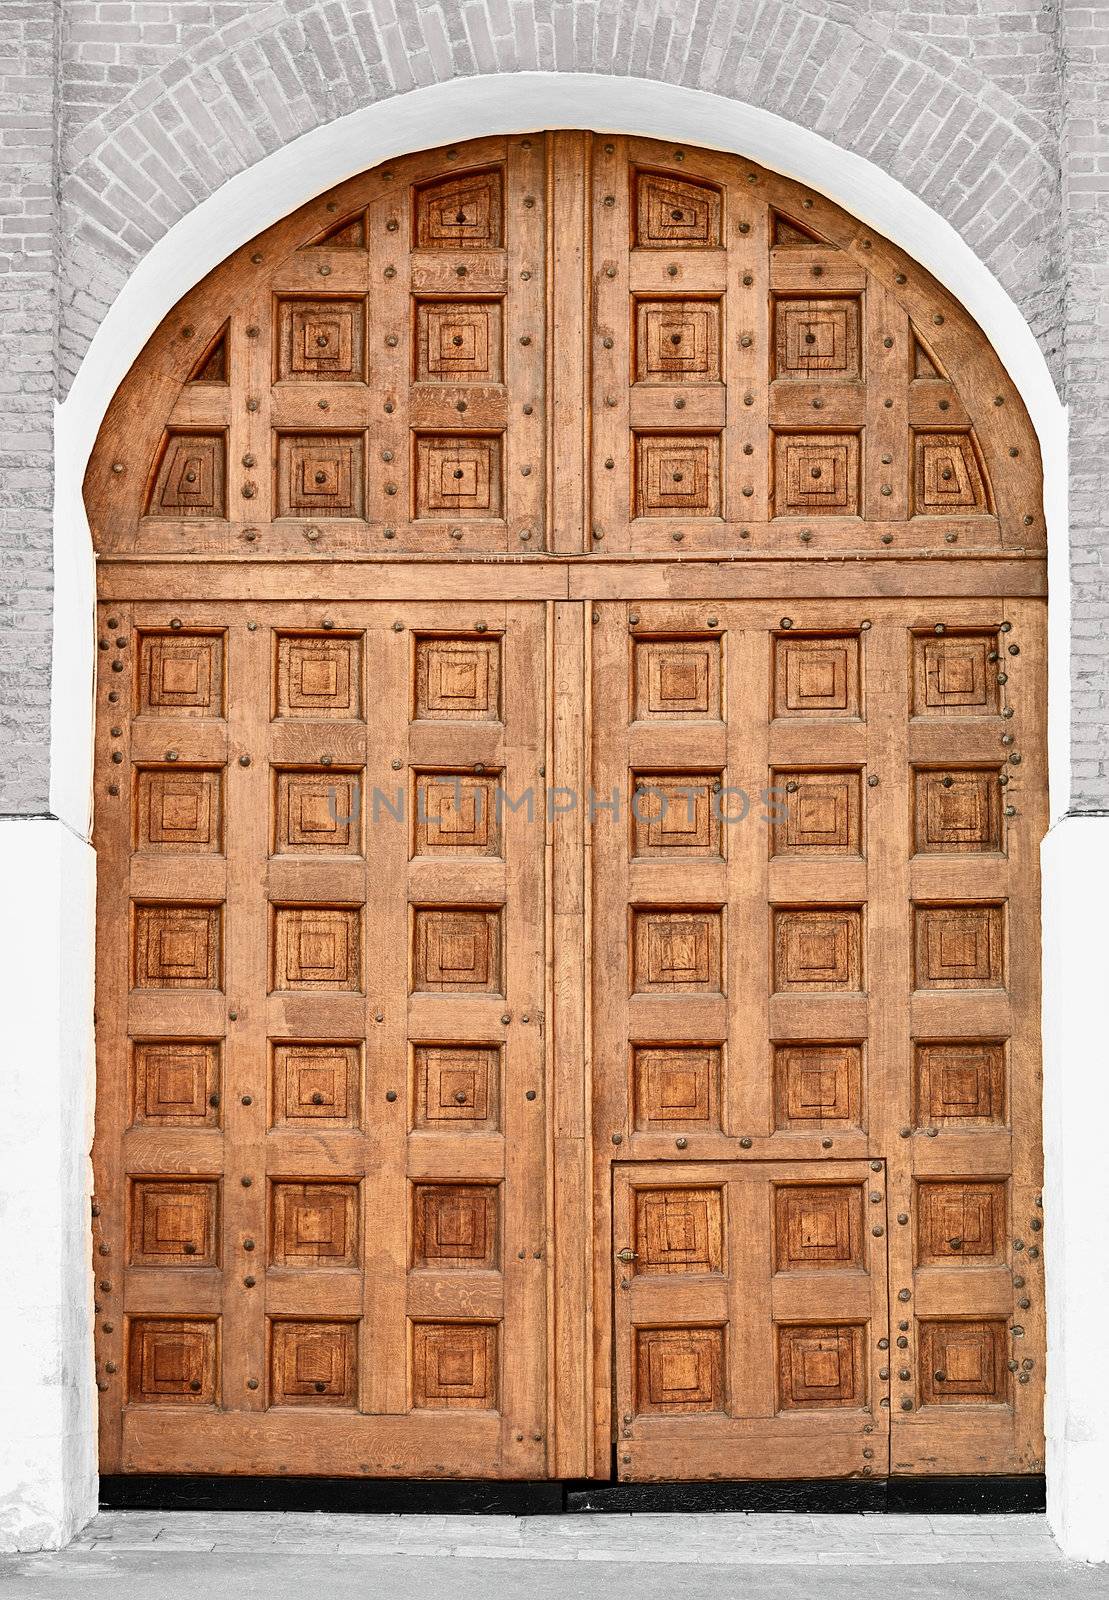 Big old wooden gate - Moscow Kremlin, Russia. by pzaxe